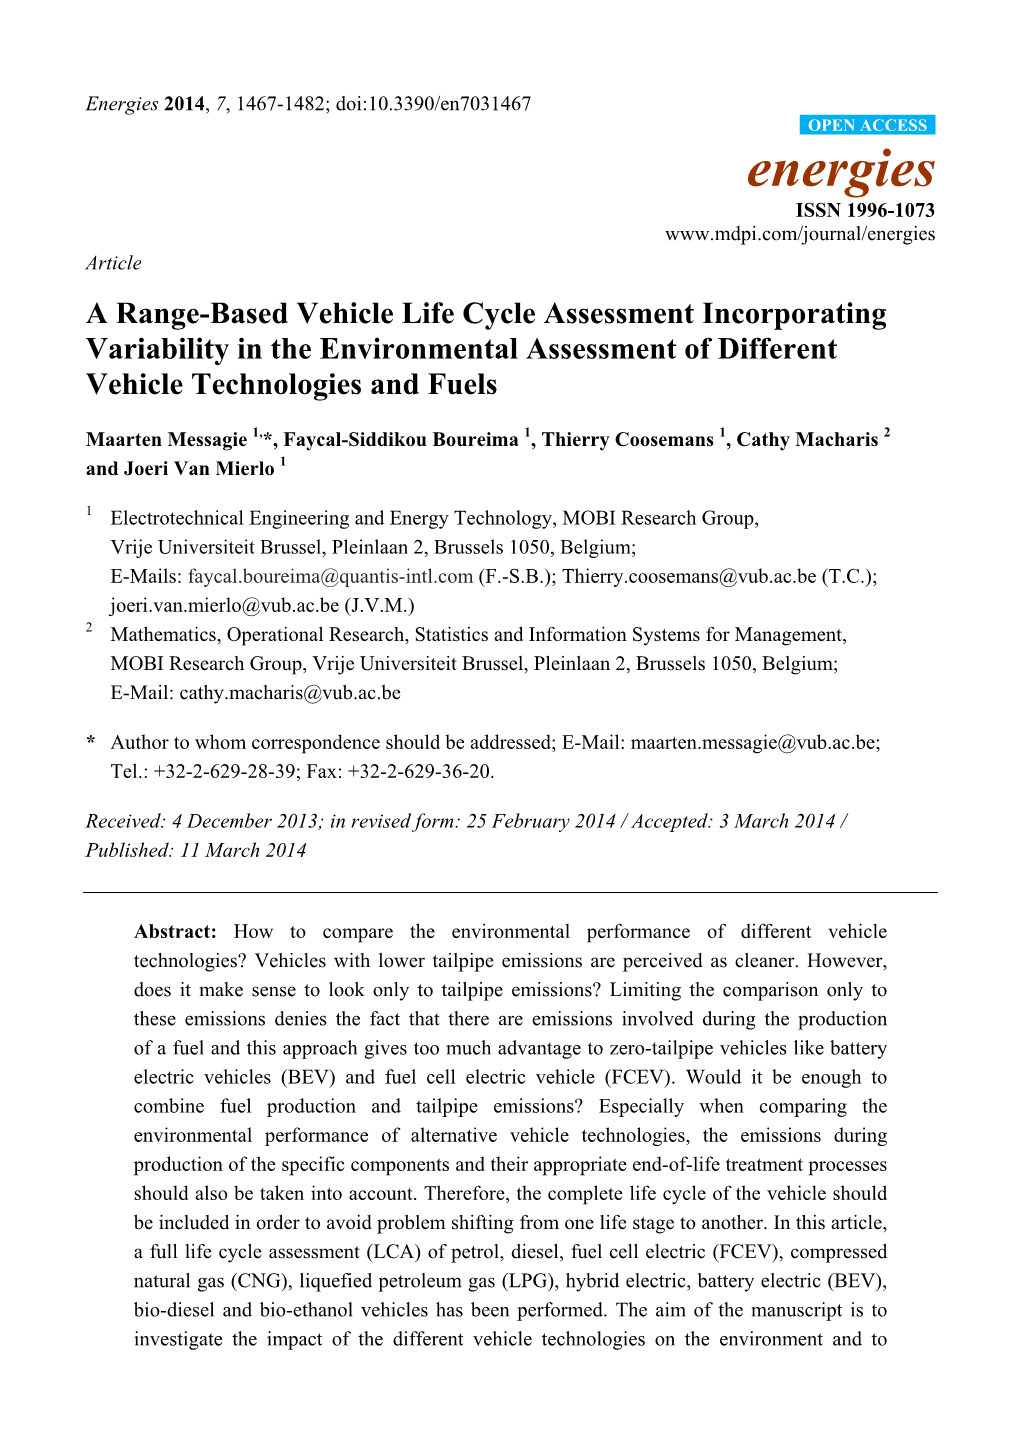 A Range-Based Vehicle Life Cycle Assessment Incorporating Variability in the Environmental Assessment of Different Vehicle Technologies and Fuels